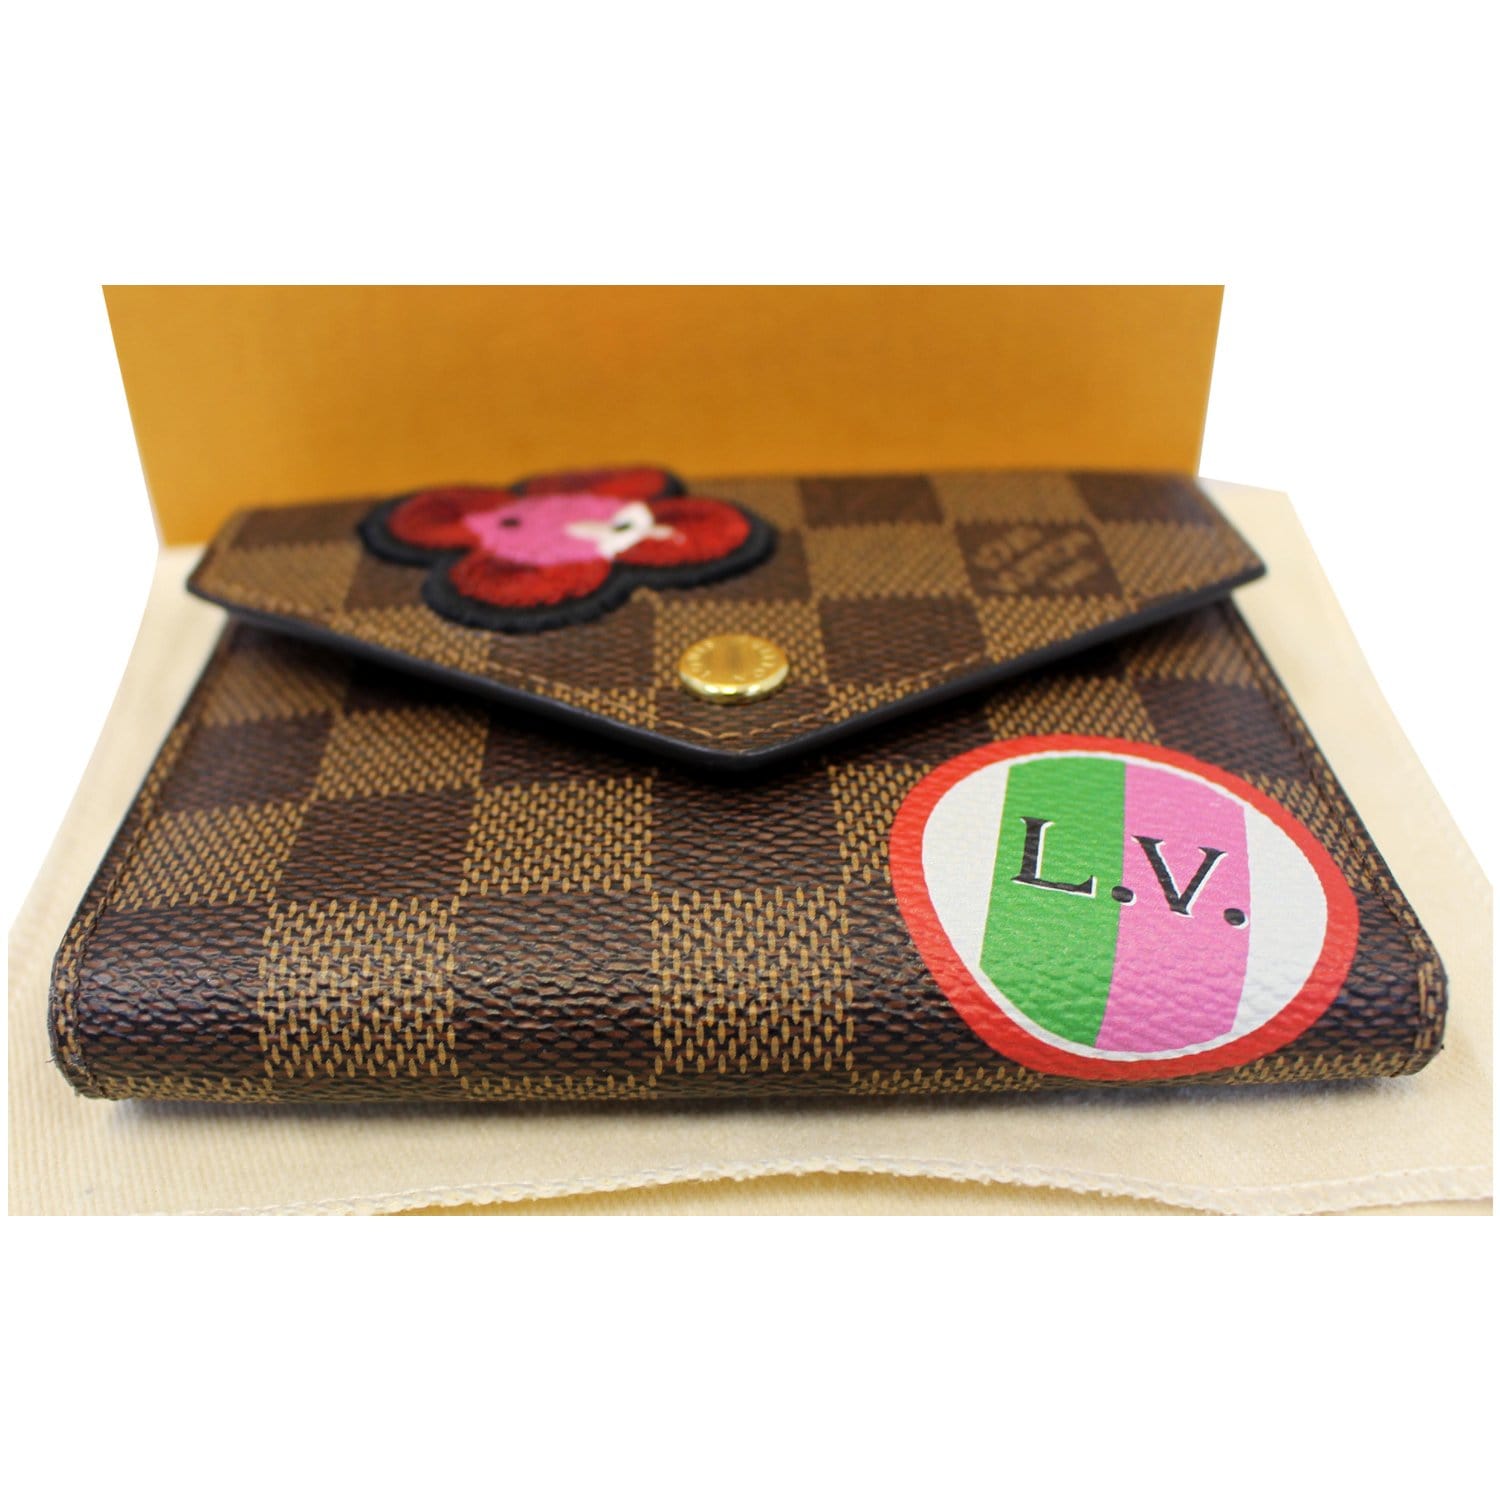 LV Victorine Wallet in brown/tan  Purses and bags, Louis vuitton